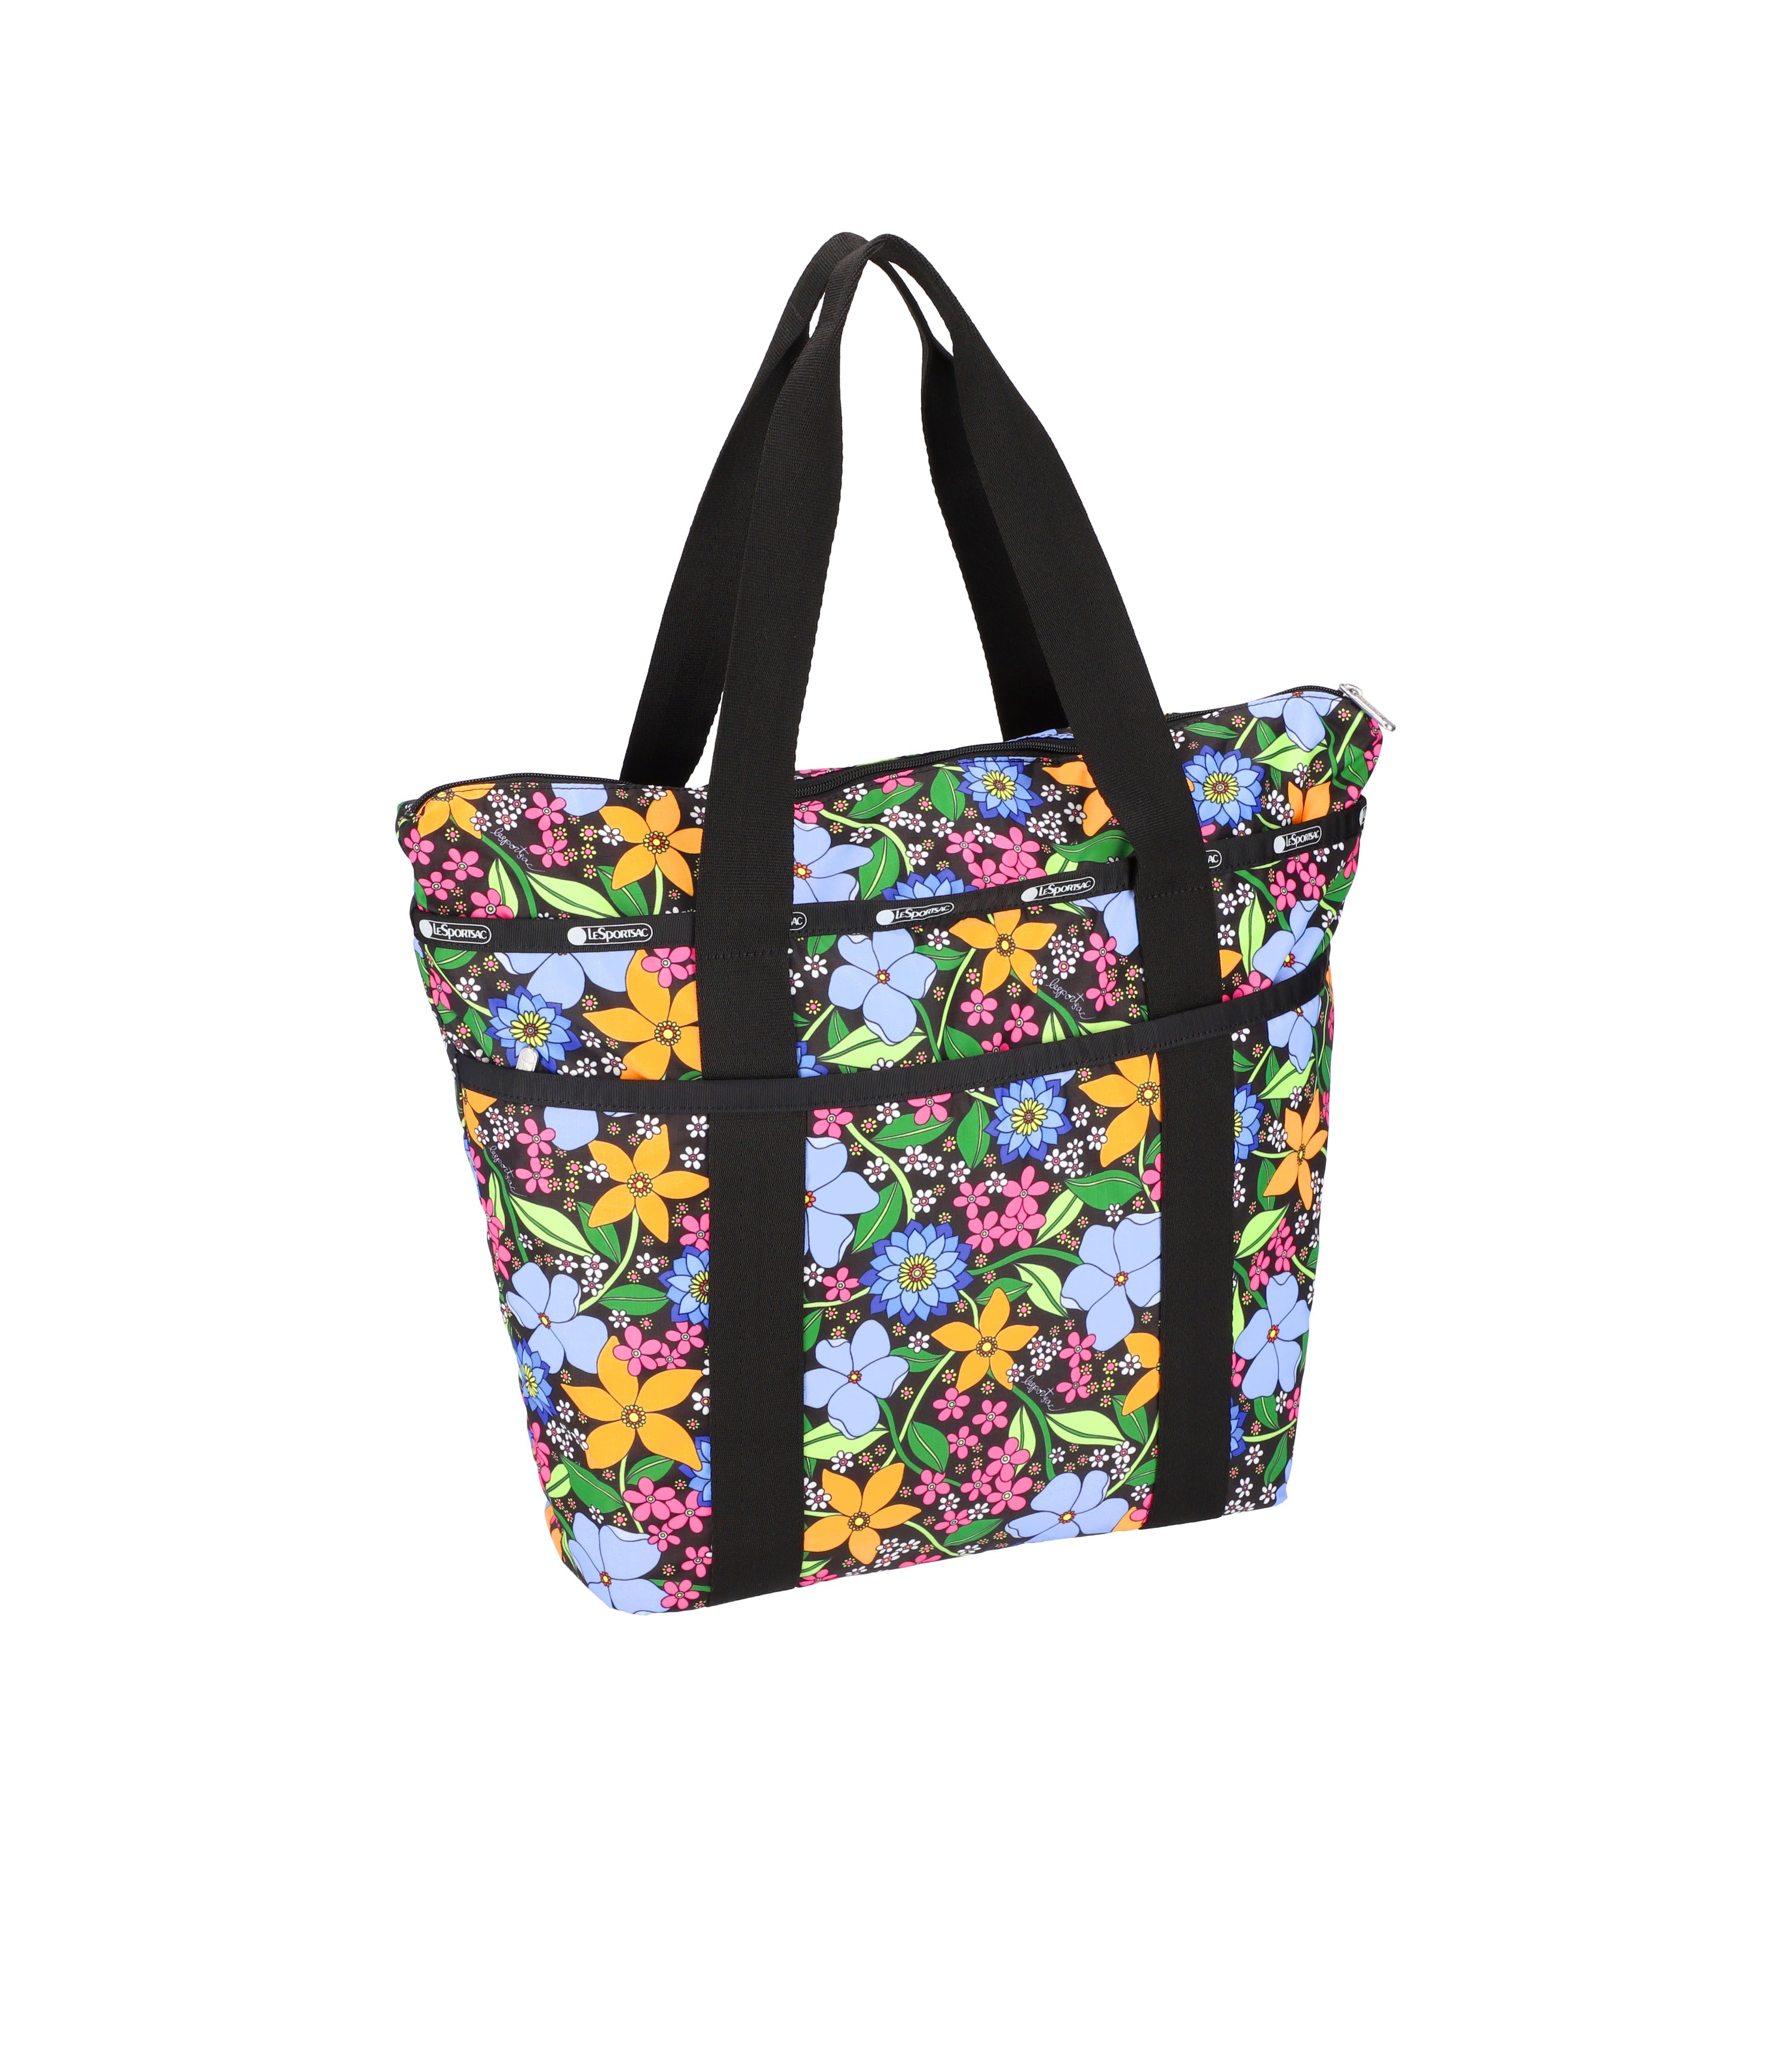 Lesportsac Everyday Zip Tote - Blue Iris Solid